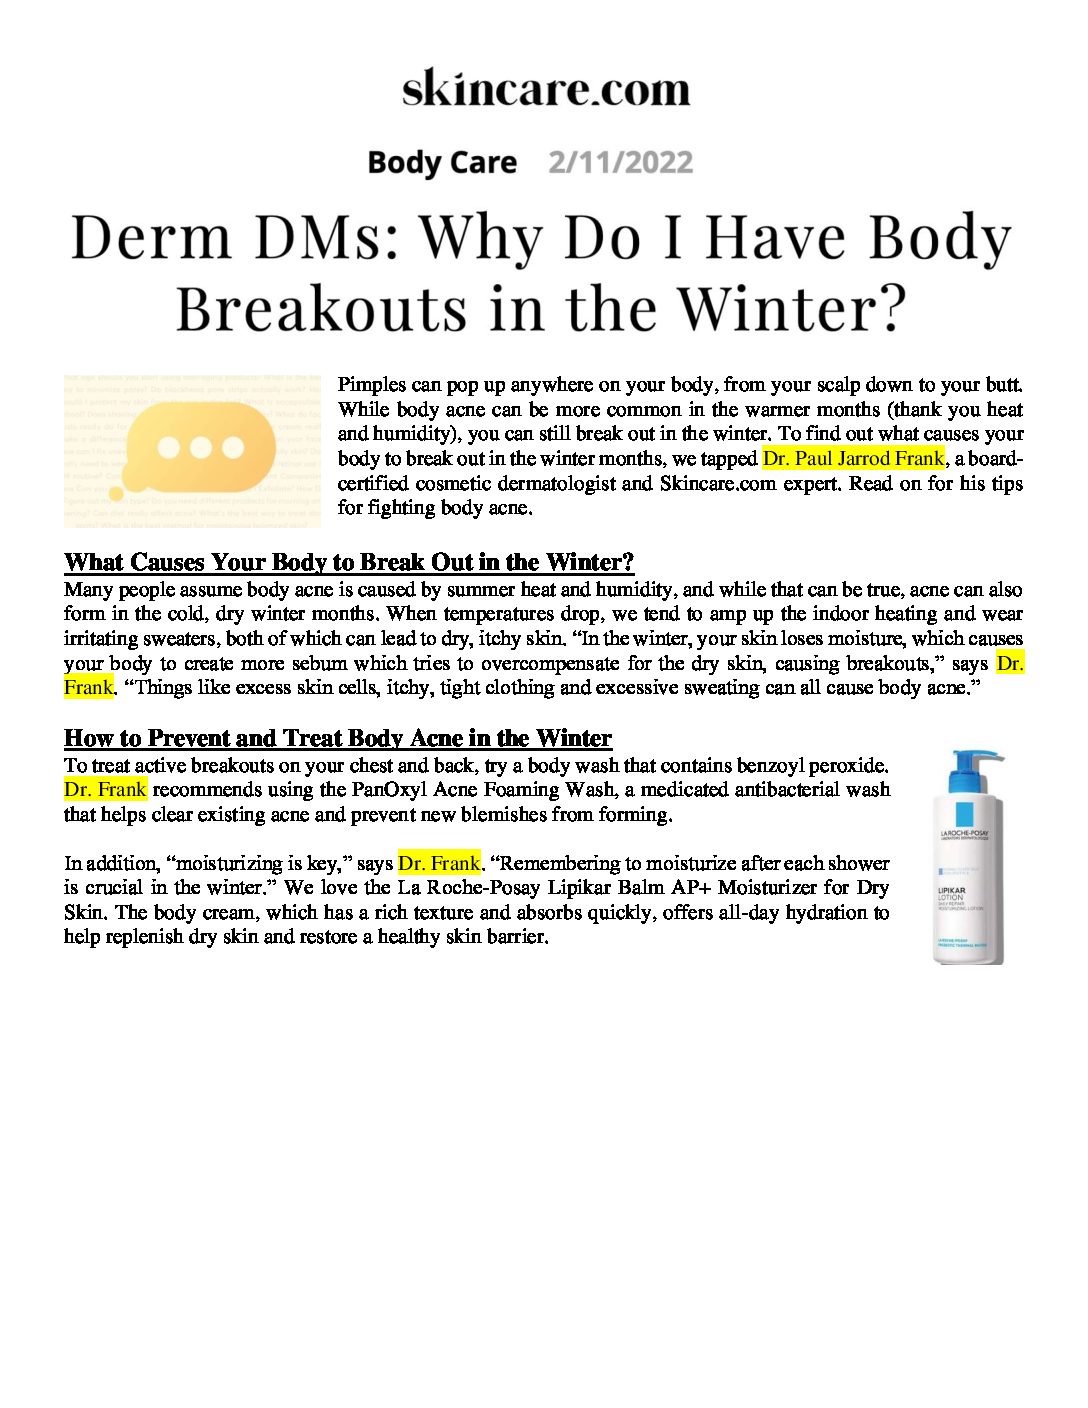 Dr. Paul Jarrod Frank featured in, “Derm DMs: Why Do I Have Body Breakouts in the Winter?”